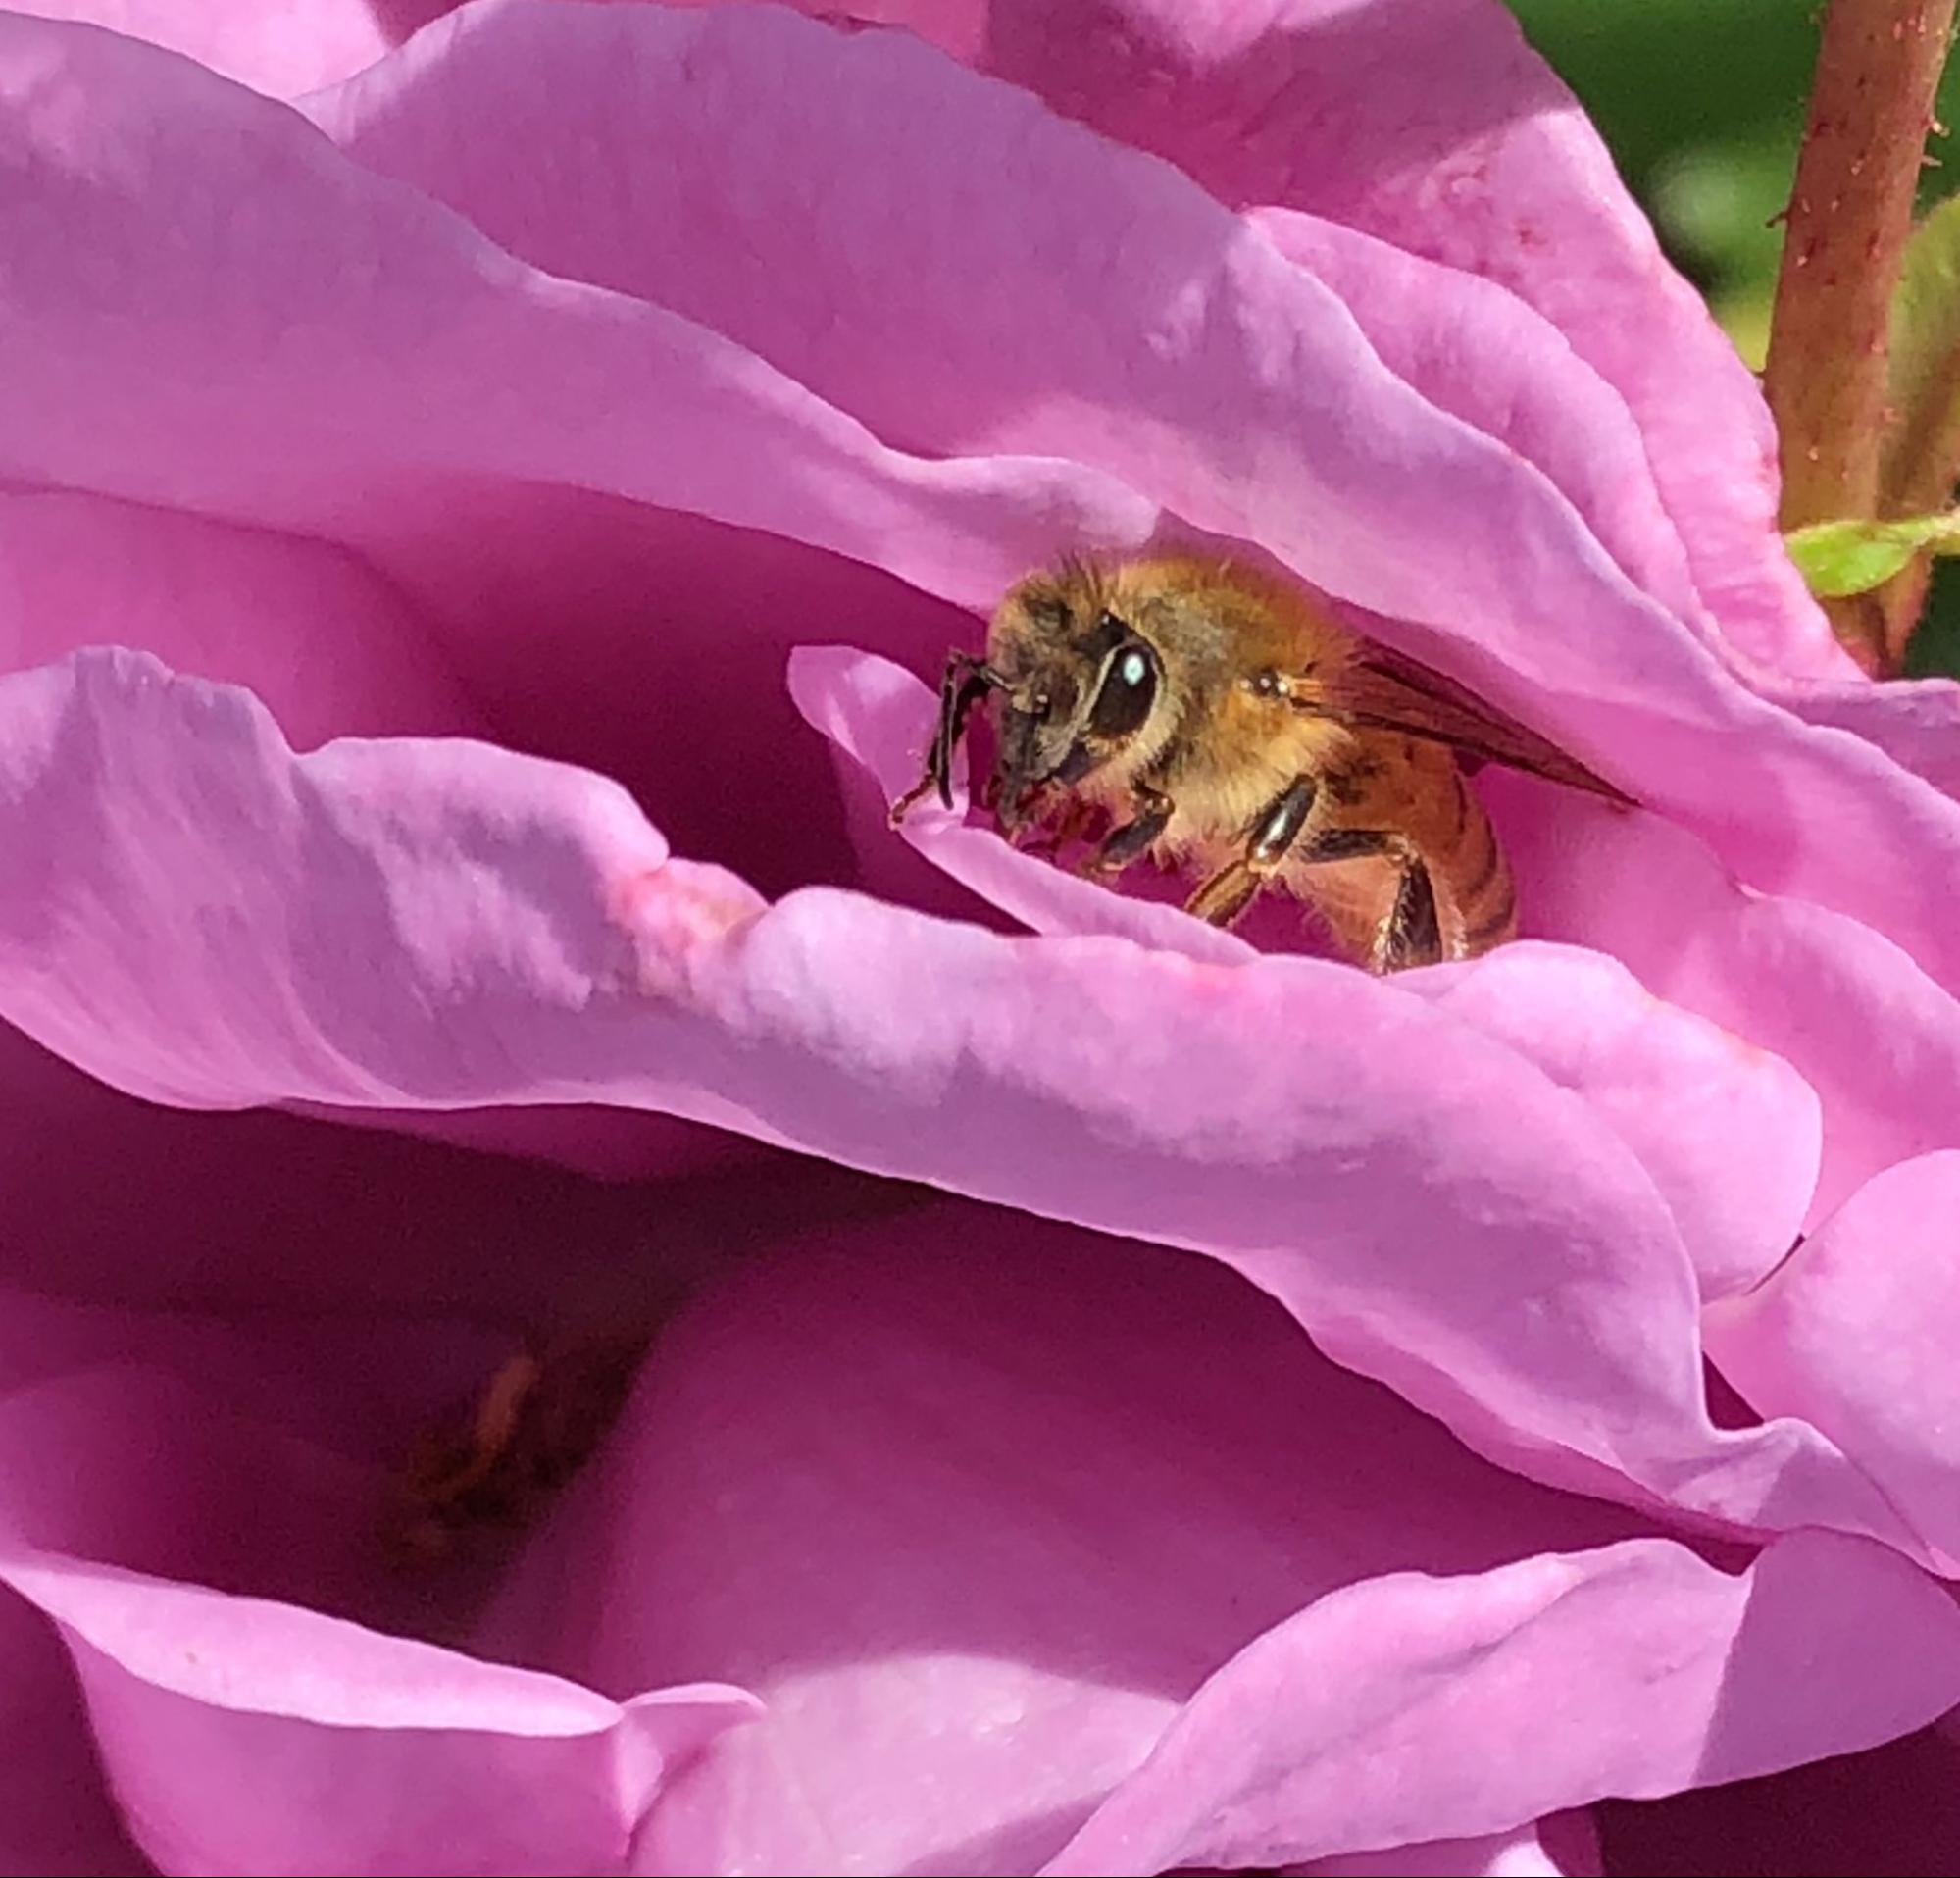 Nestled in the petals a bee